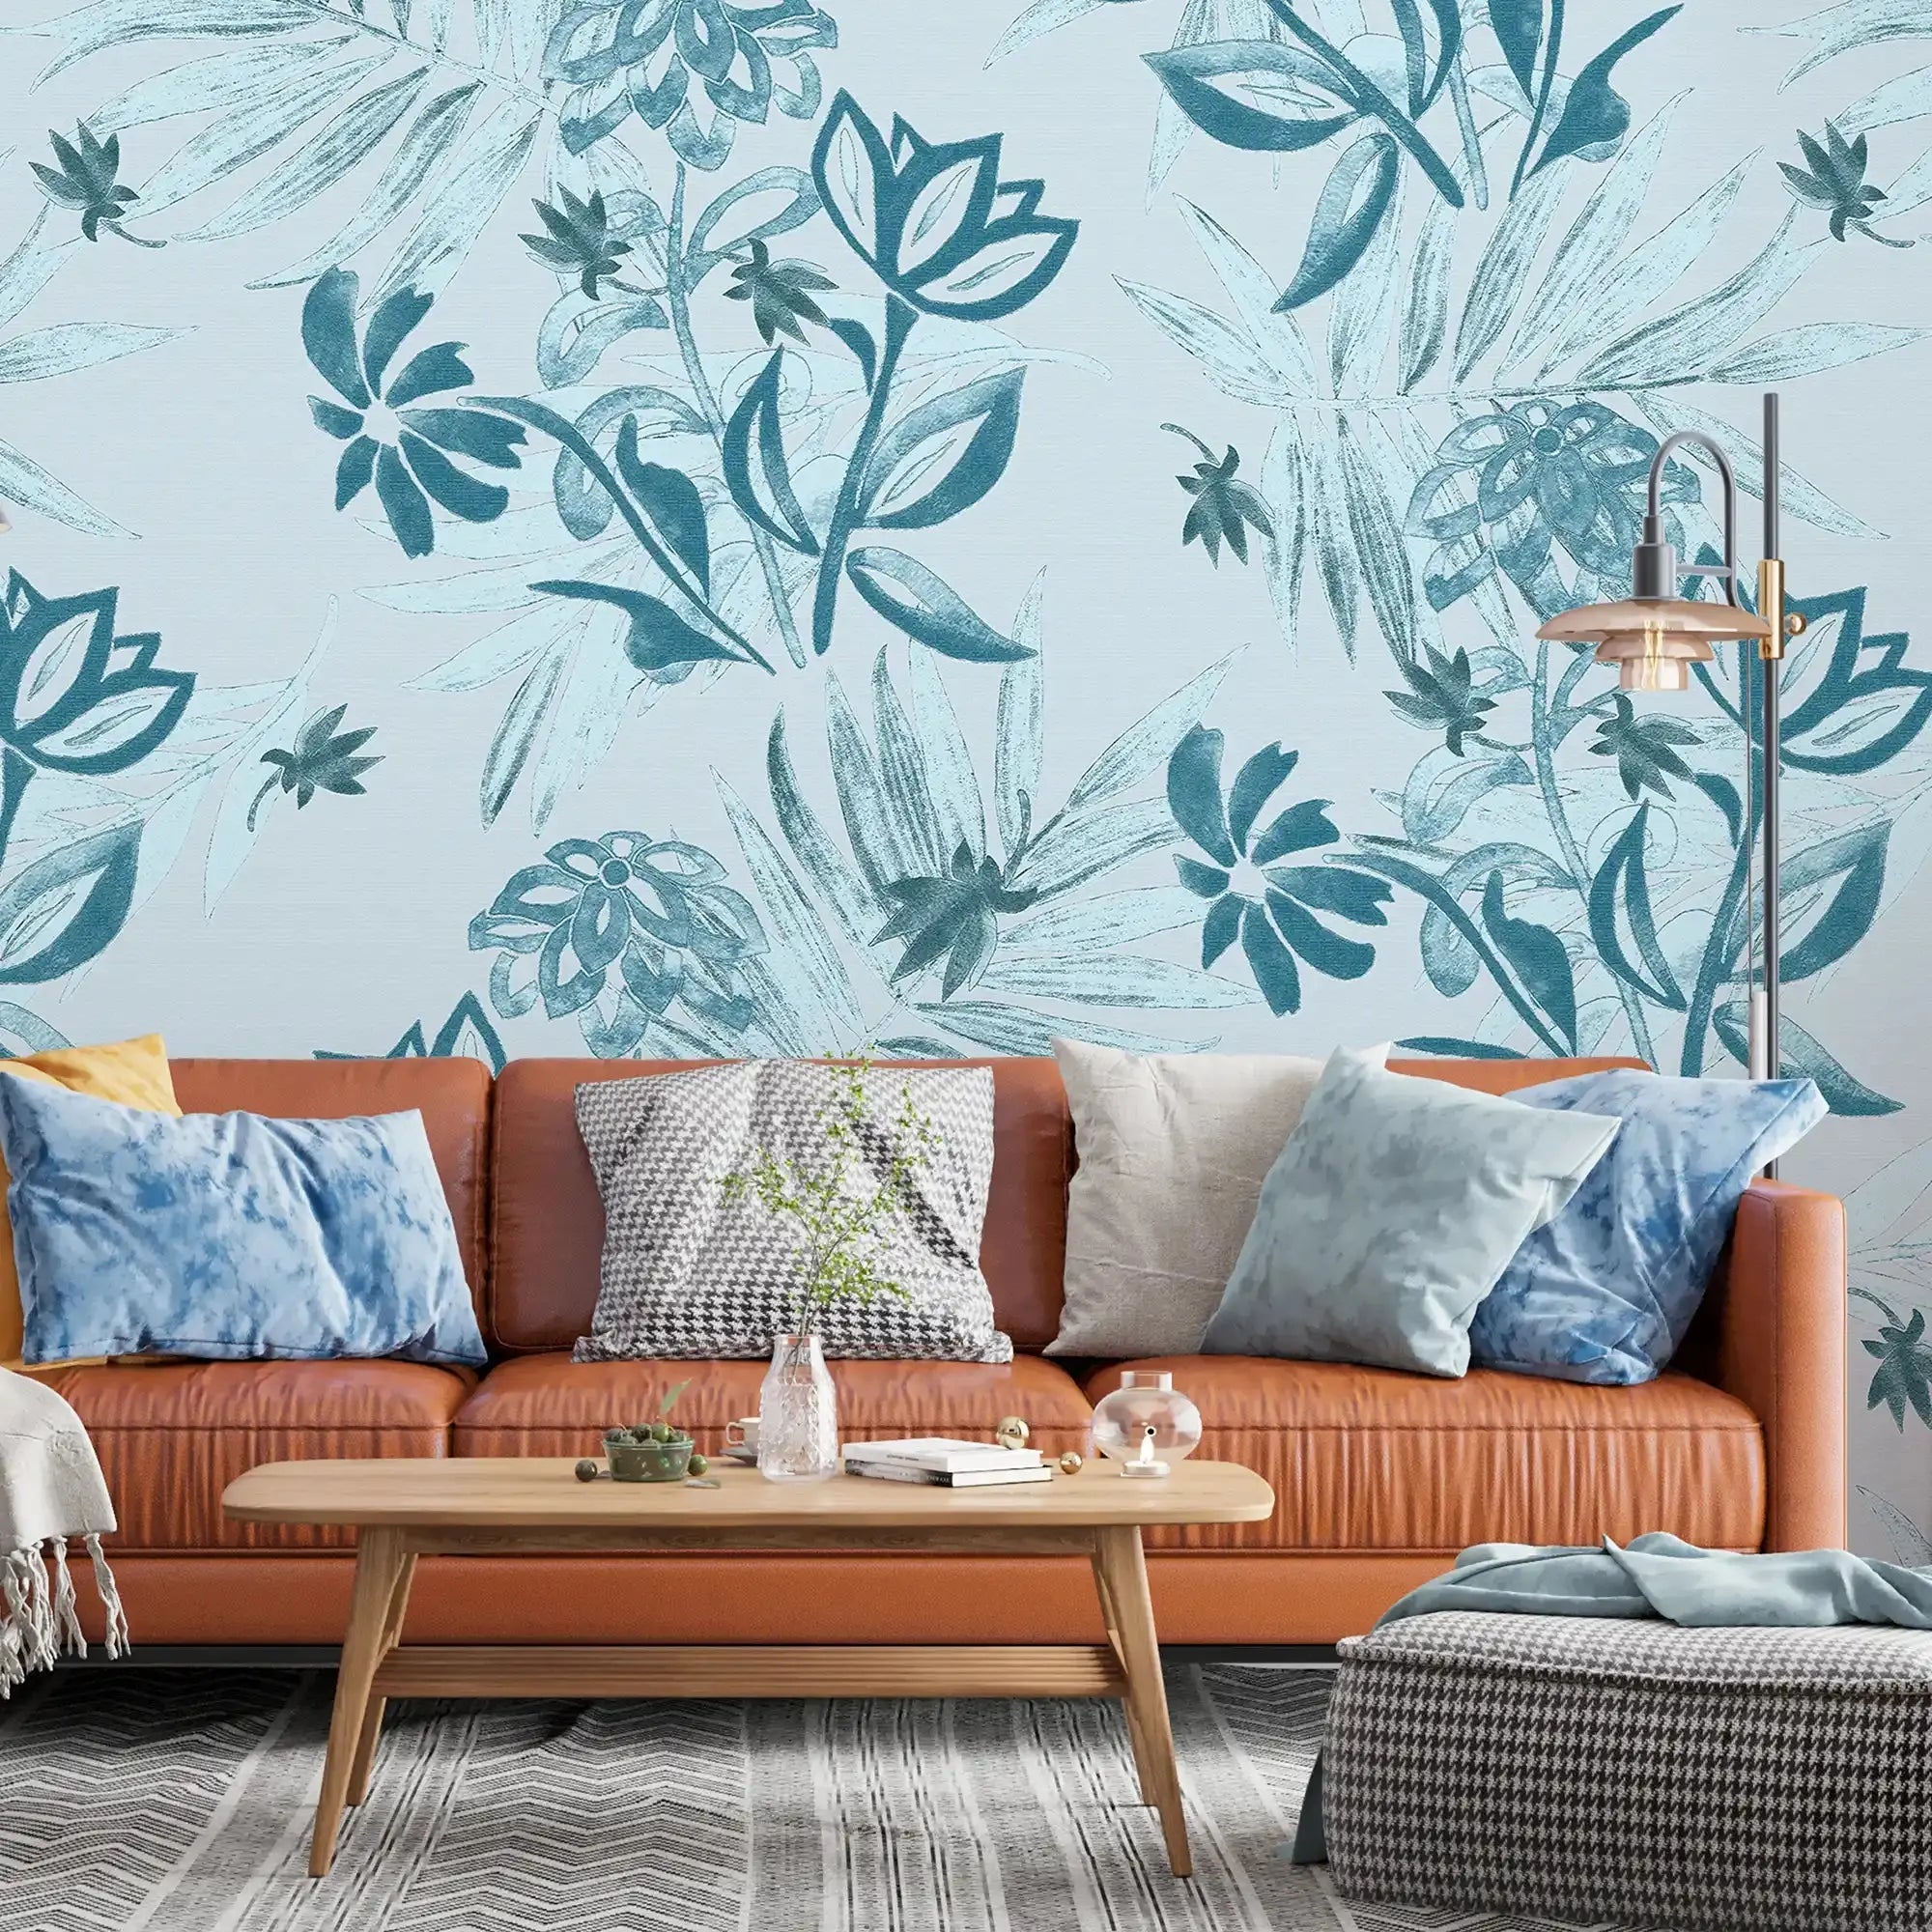 3086-D / Plant Wallpaper: Self-Adhesive, Blue Hibiscus and Cypress Pattern, Floral Wall Mural for Modern Room Decor - Artevella